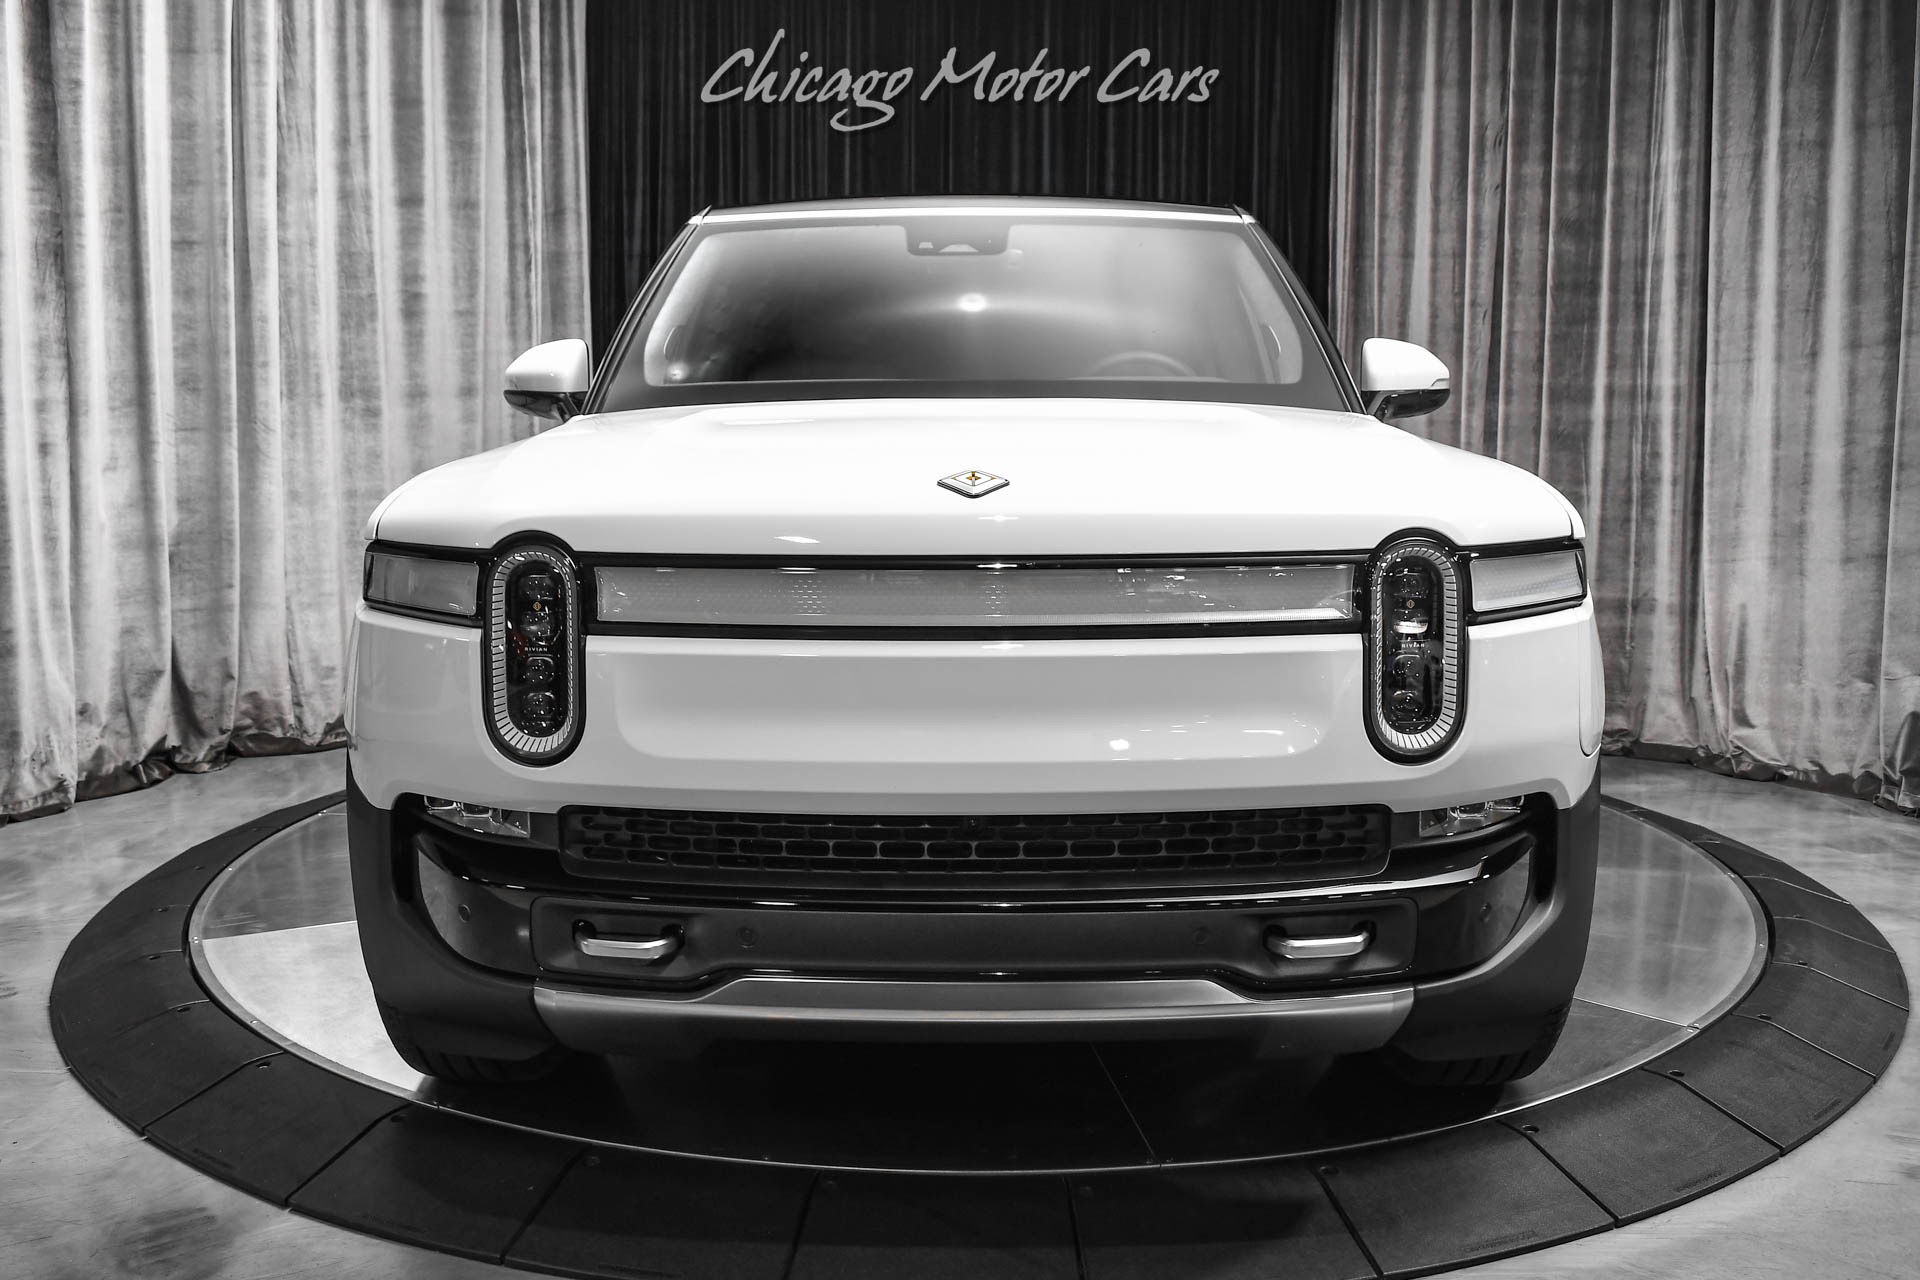 Used-2023-Rivian-R1S-Adventure-SUV-Large-Battery-Pack-Quad-Motor-AWD-BEST-Color-Combo